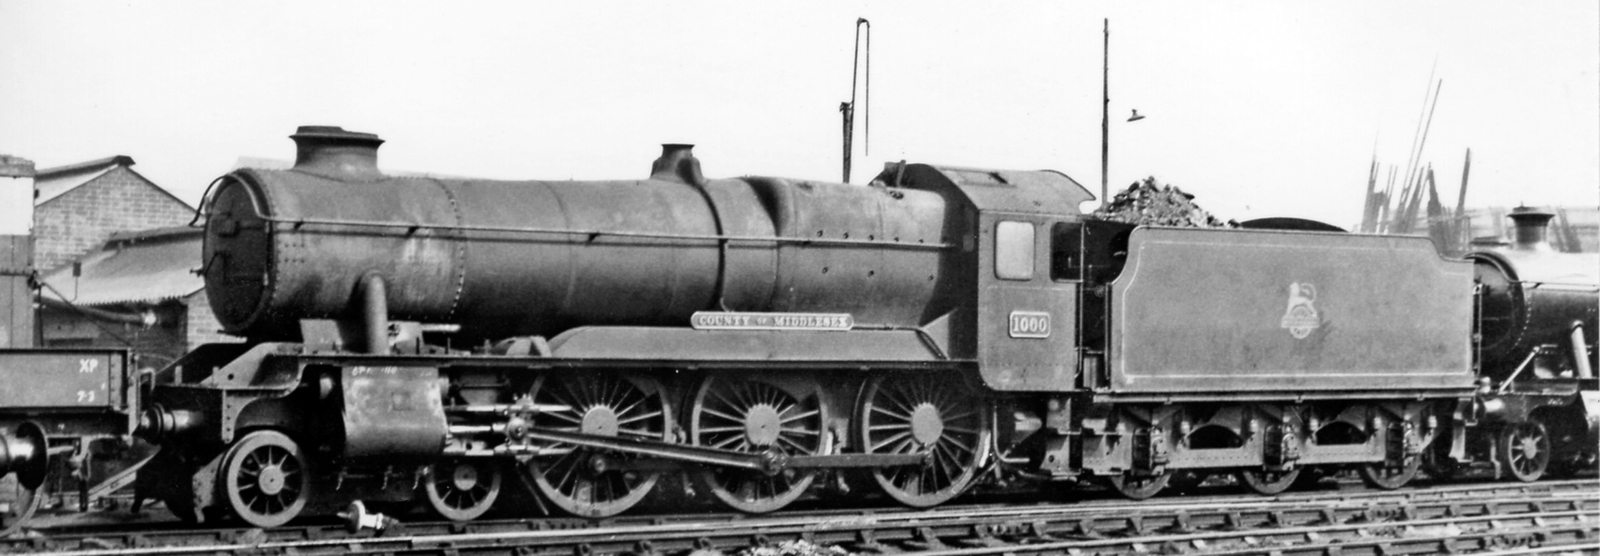 No. 1000 “County of Middlesex” in August 1958 at Bristol Depot